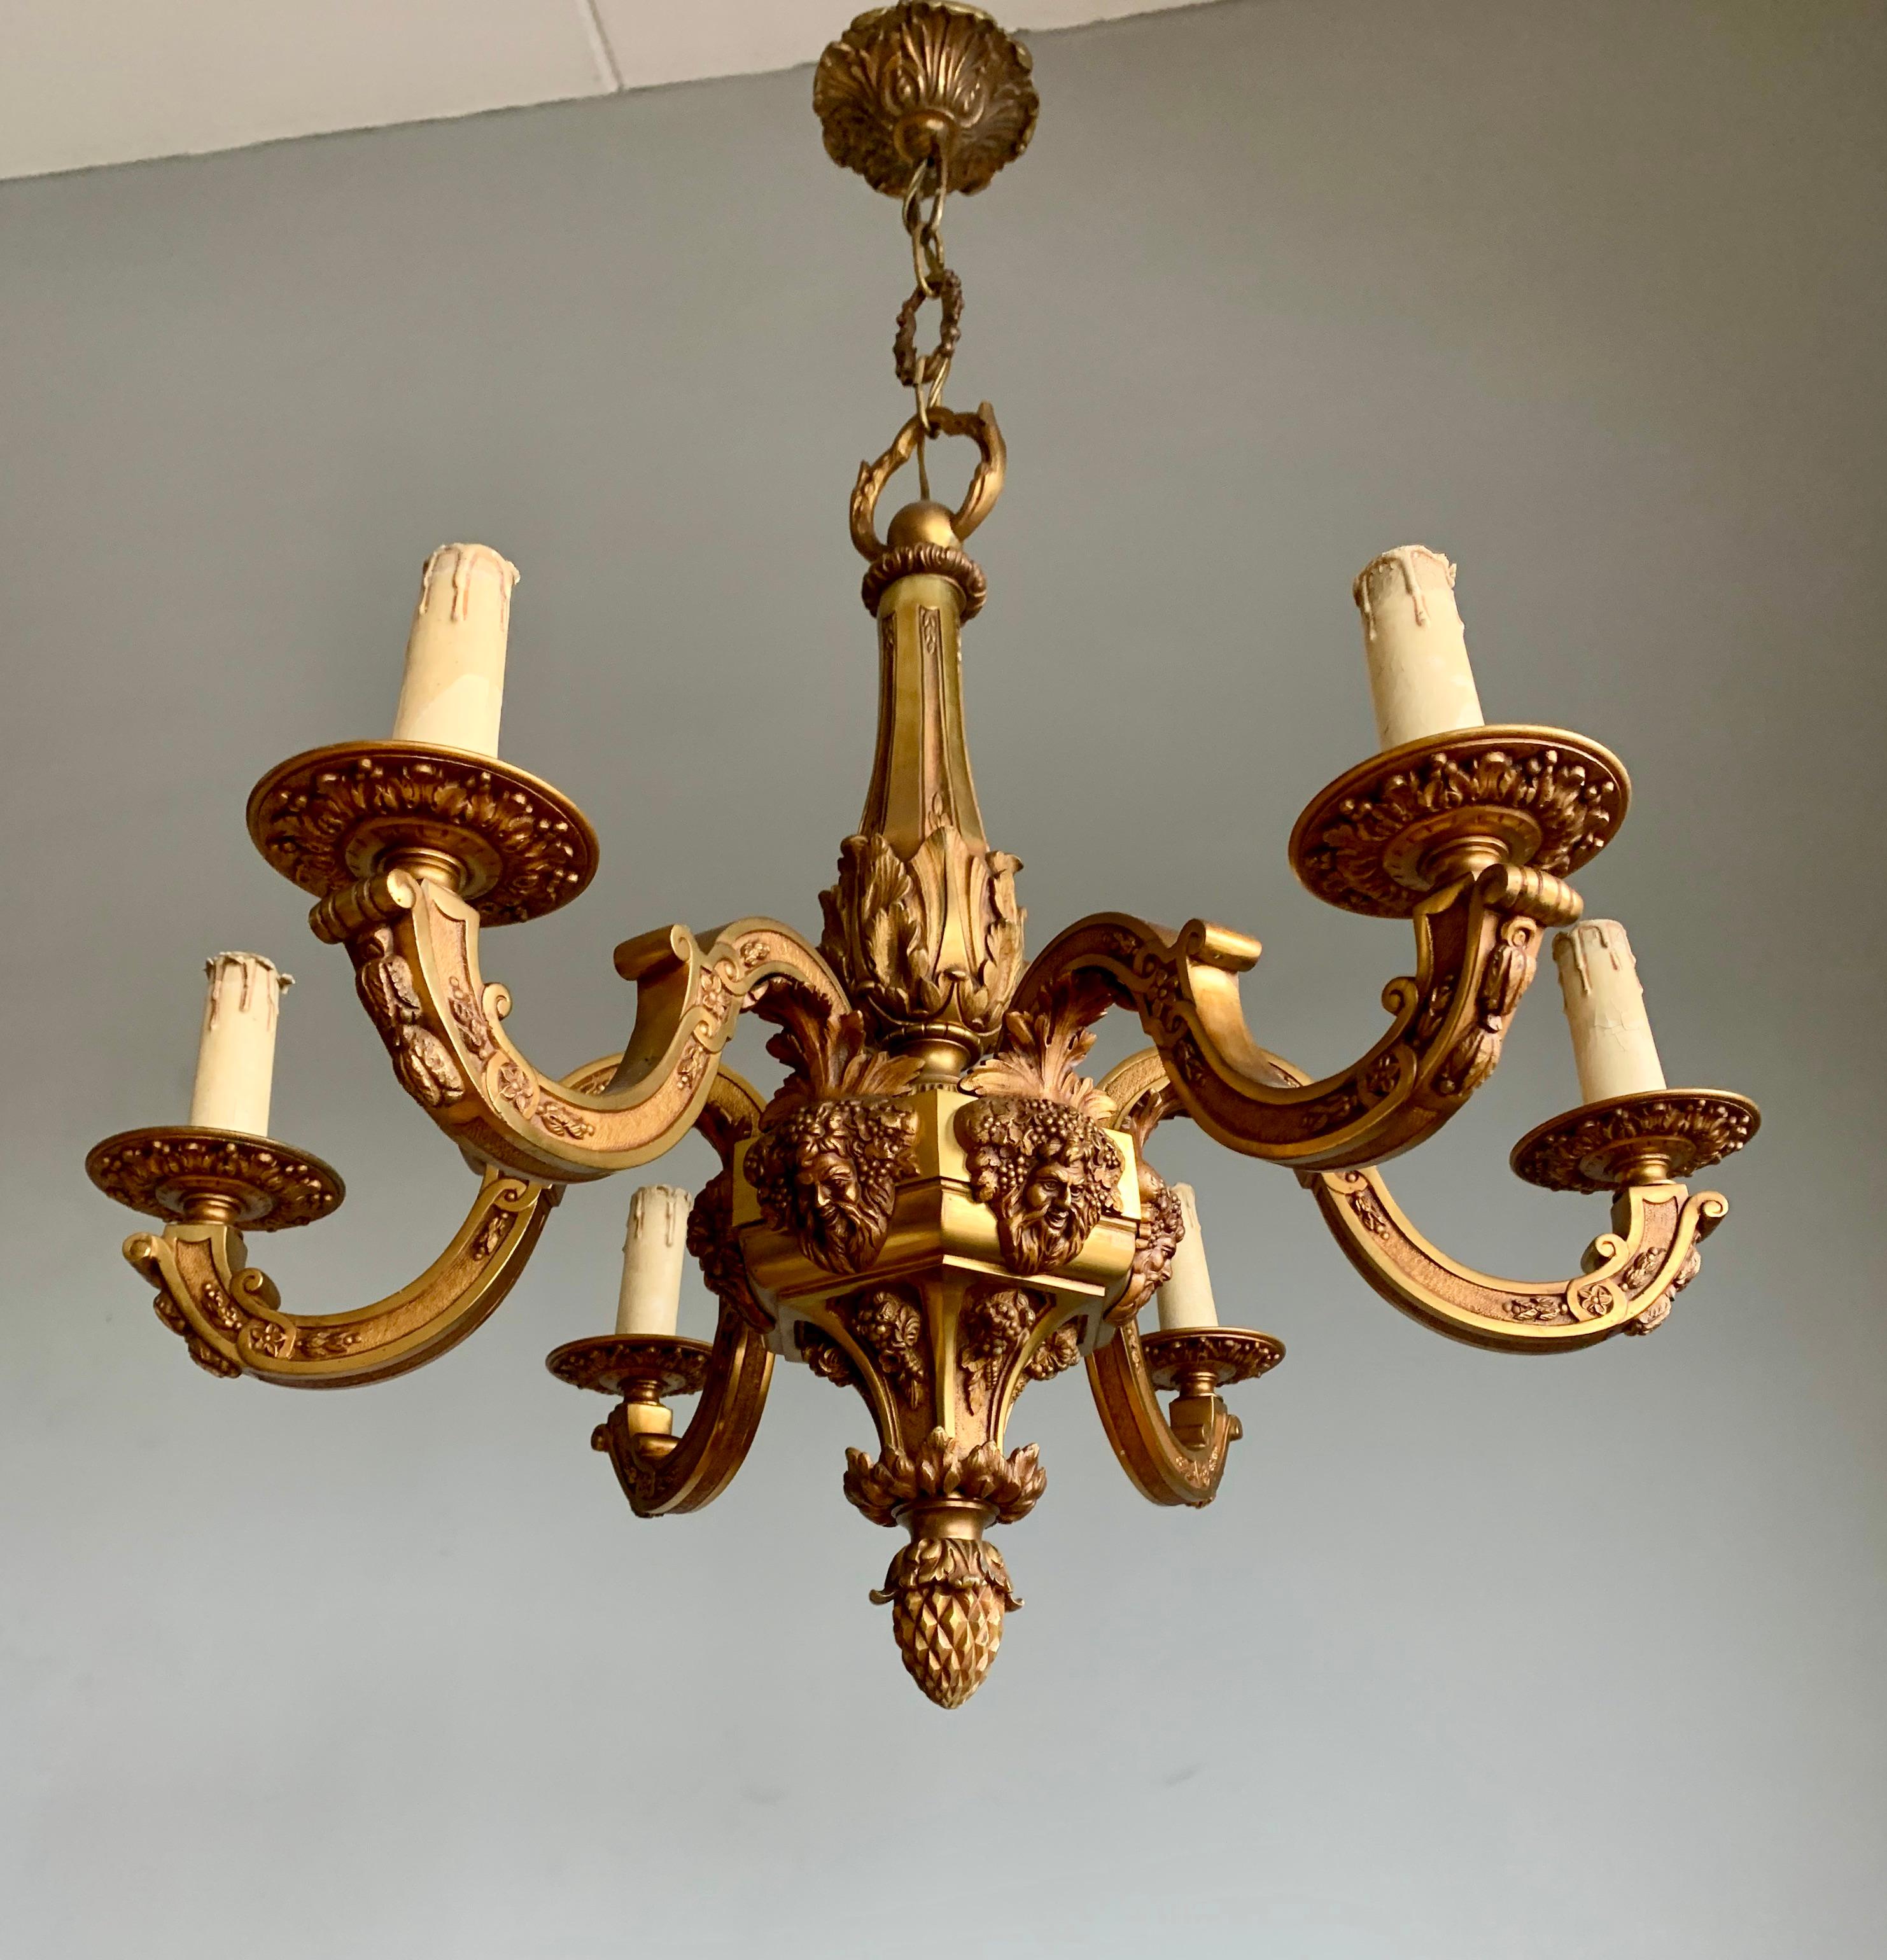 French Antique Mazarin Six Light Gilt Bronze Chandelier with Bacchus God of Wine Masks For Sale